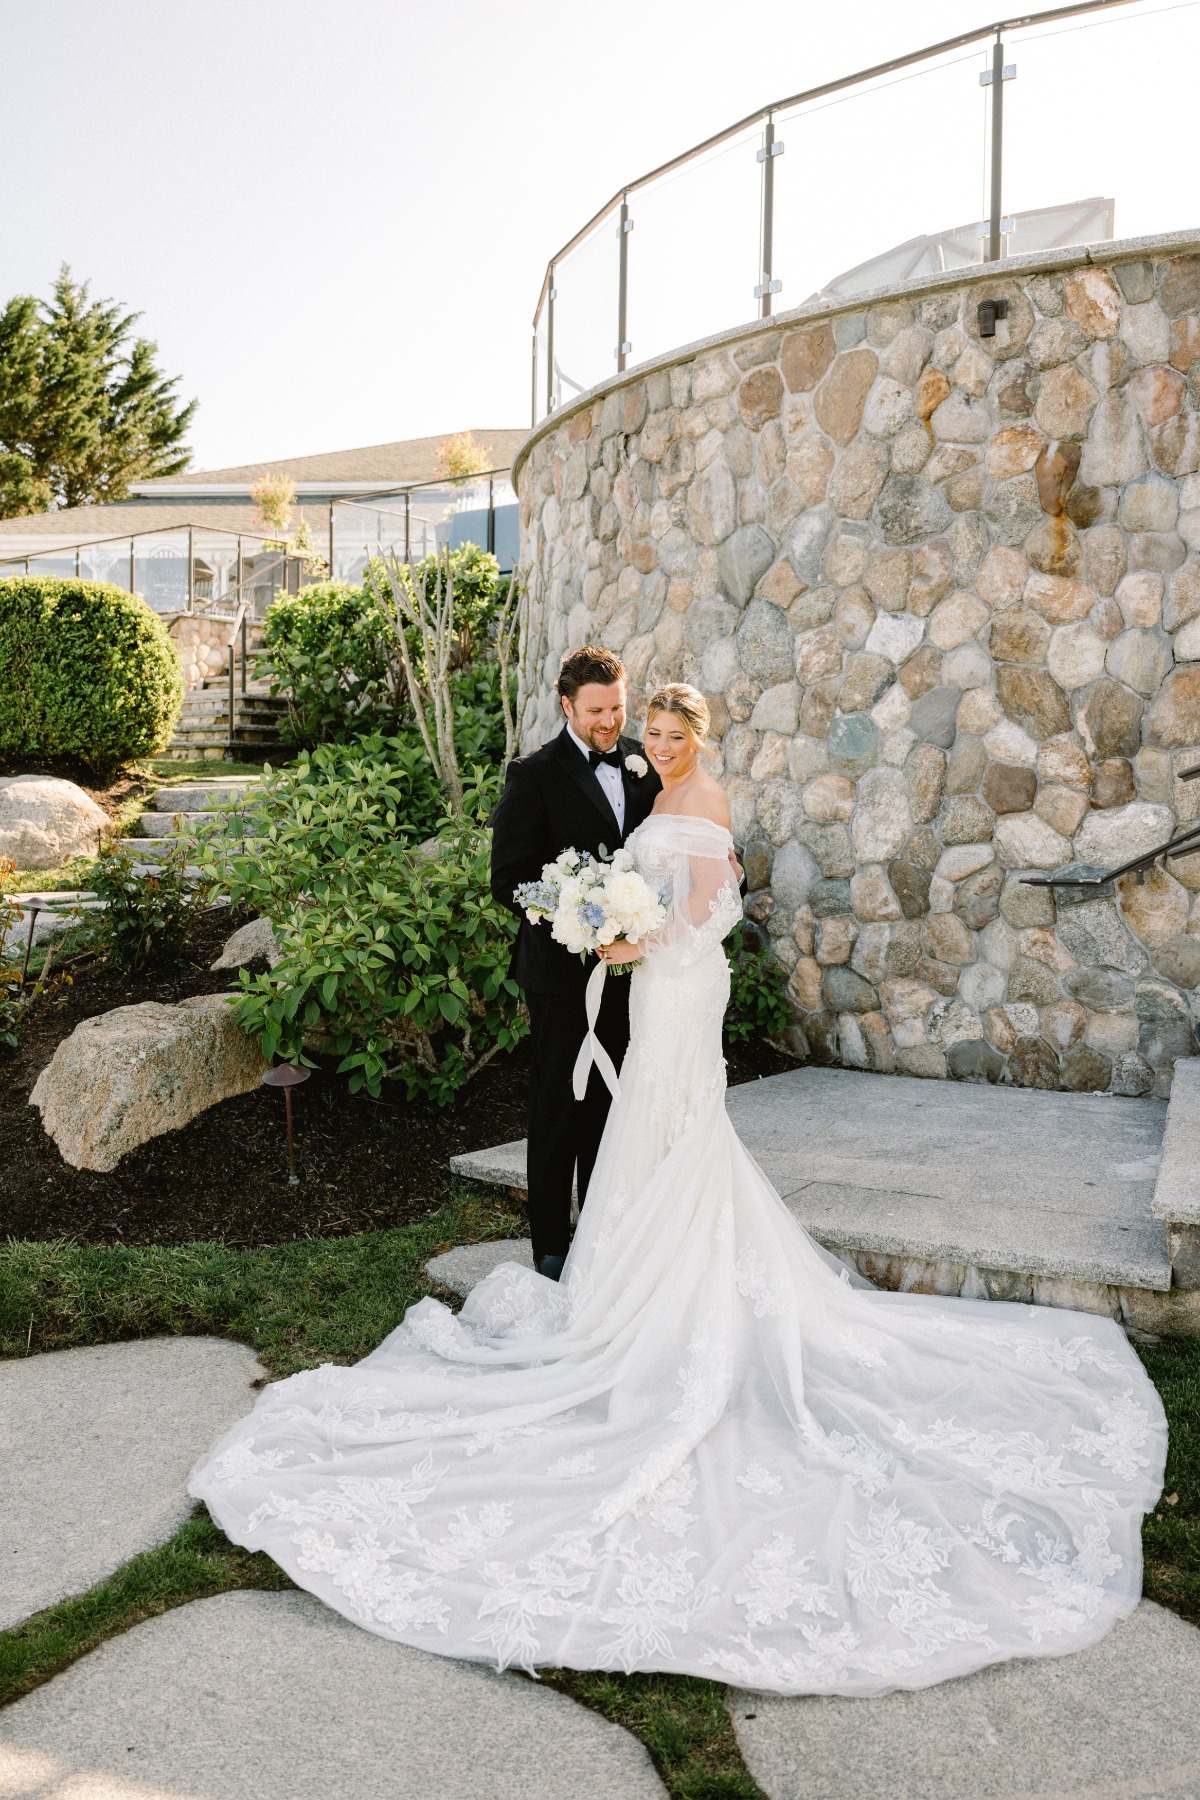 Luscious stone and greenery backdrop at Cape Cod wedding